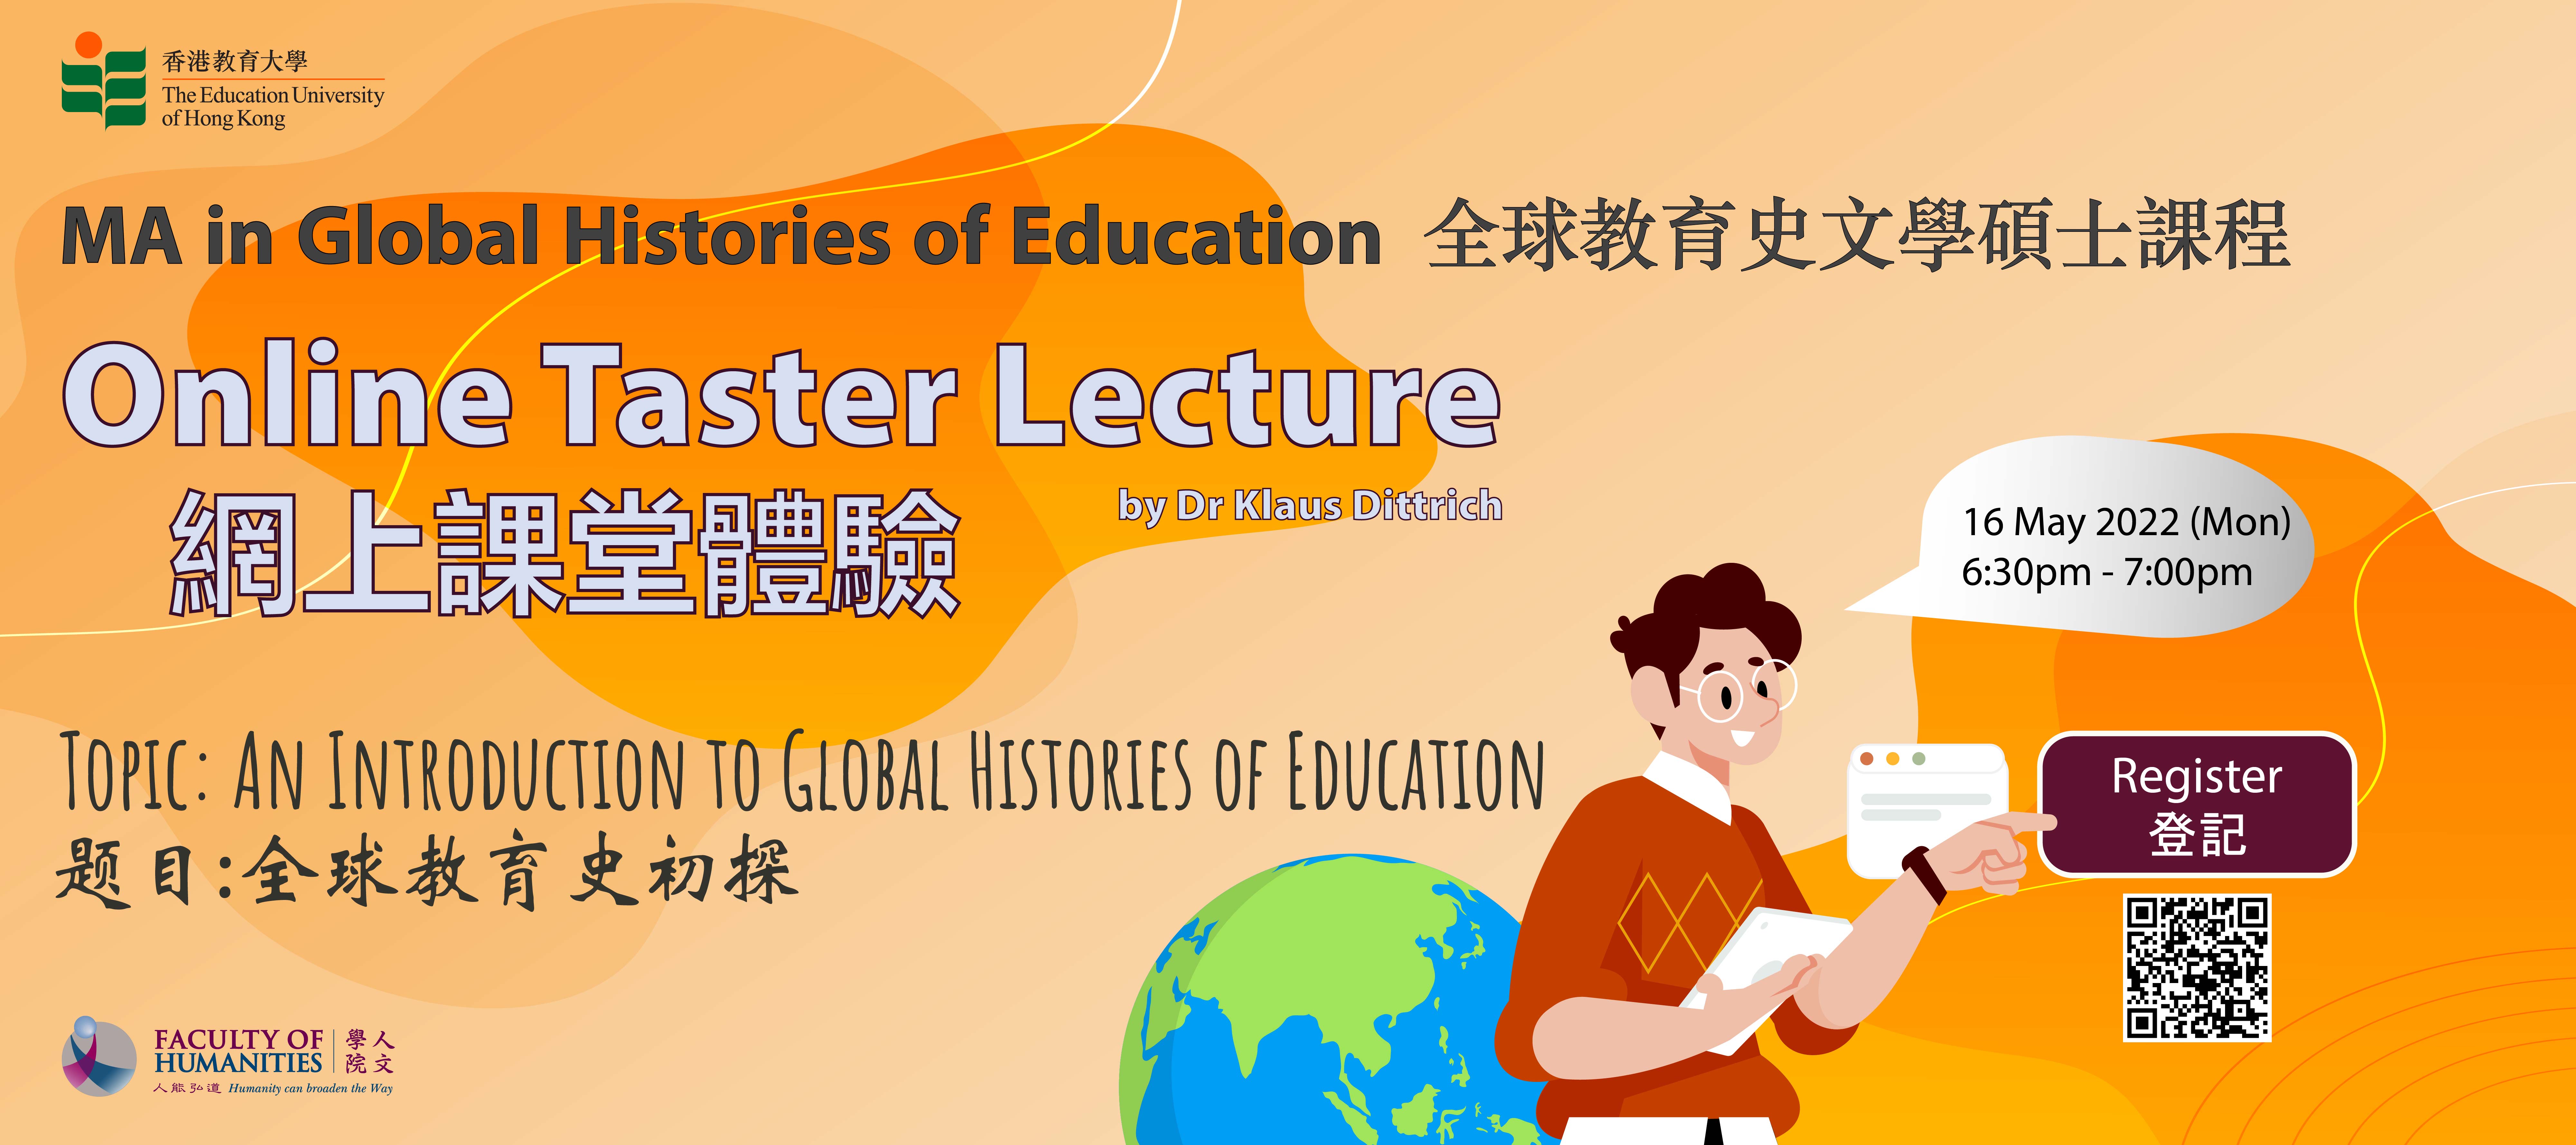 MA in Global Histories of Education - Online Taster Lecture